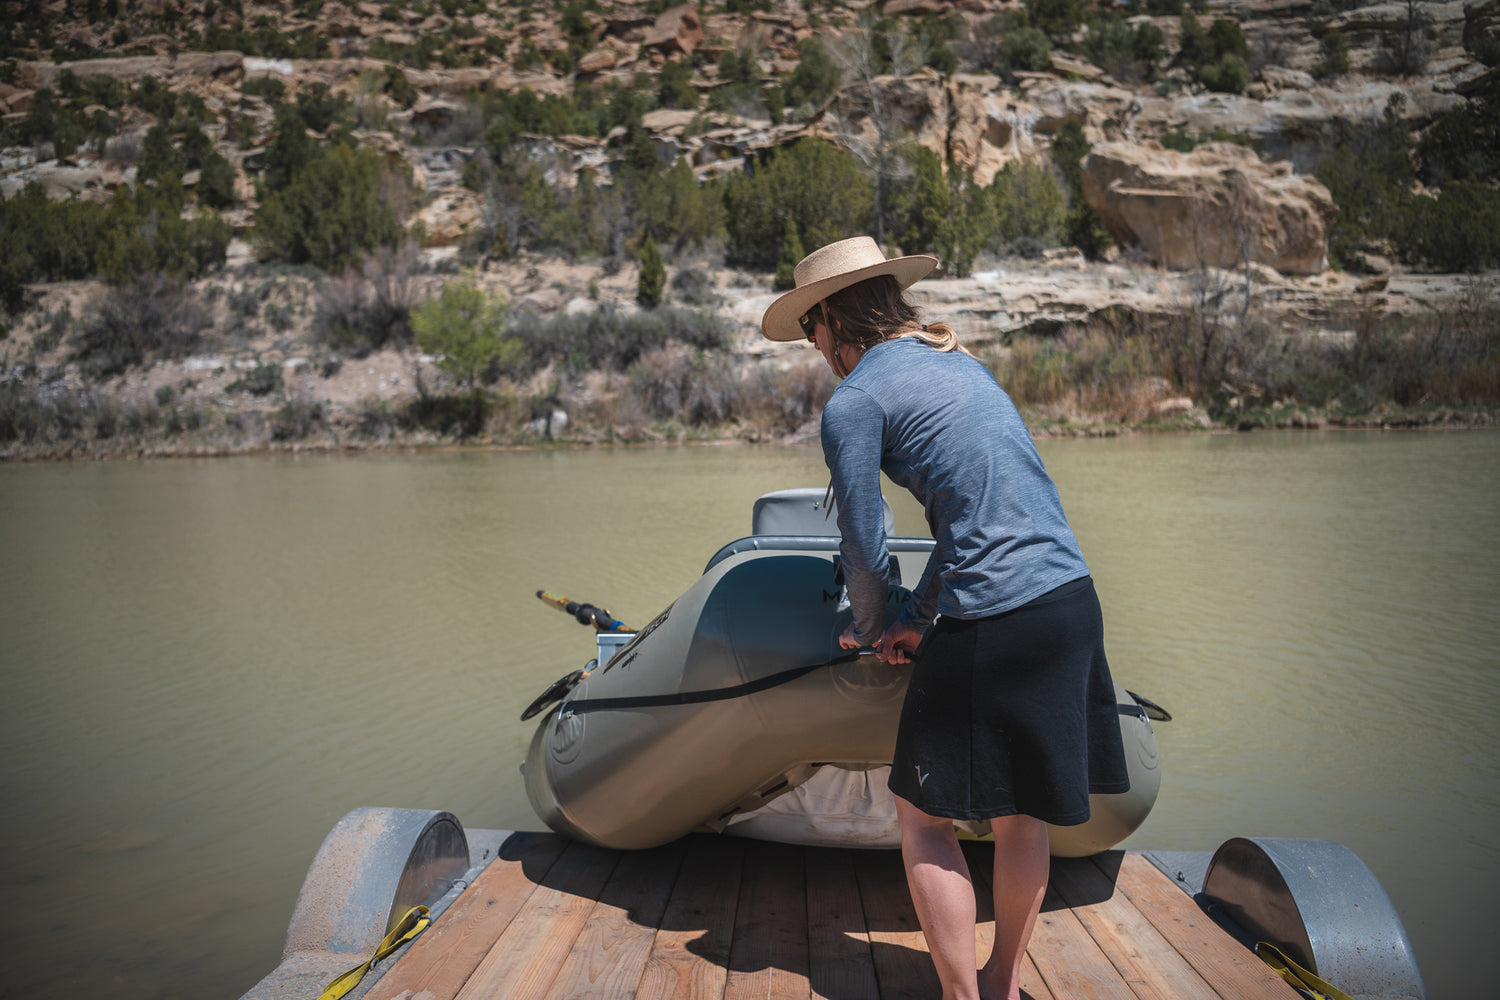 WOMAN'S SWIFT WATER SKIRT PULLING BOAT OUT OF RIVER